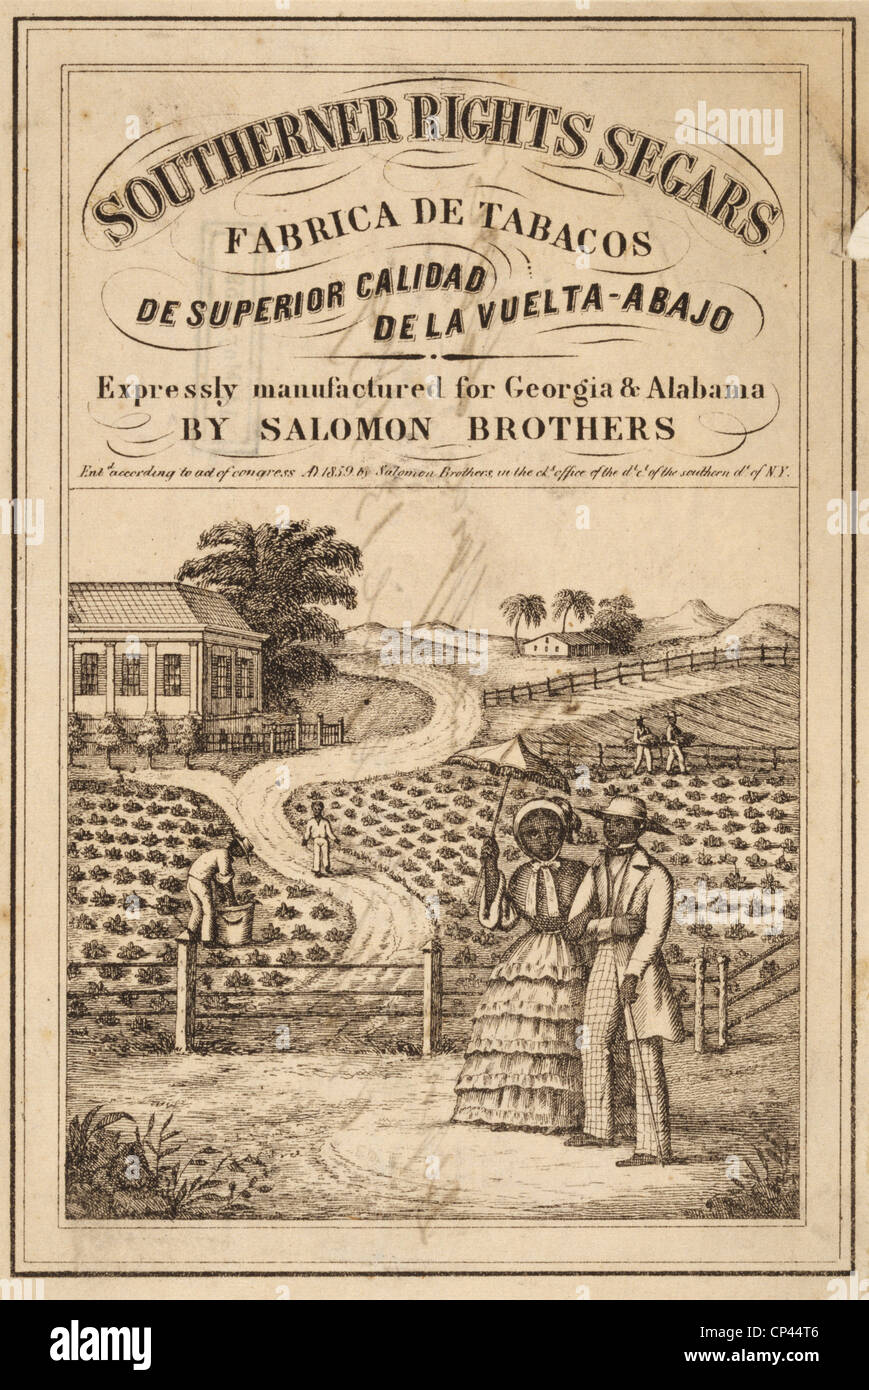 Salomon Brothers cigar label. The illustration shows a tobacco plantation with manor house and a field in which black slaves Stock Photo